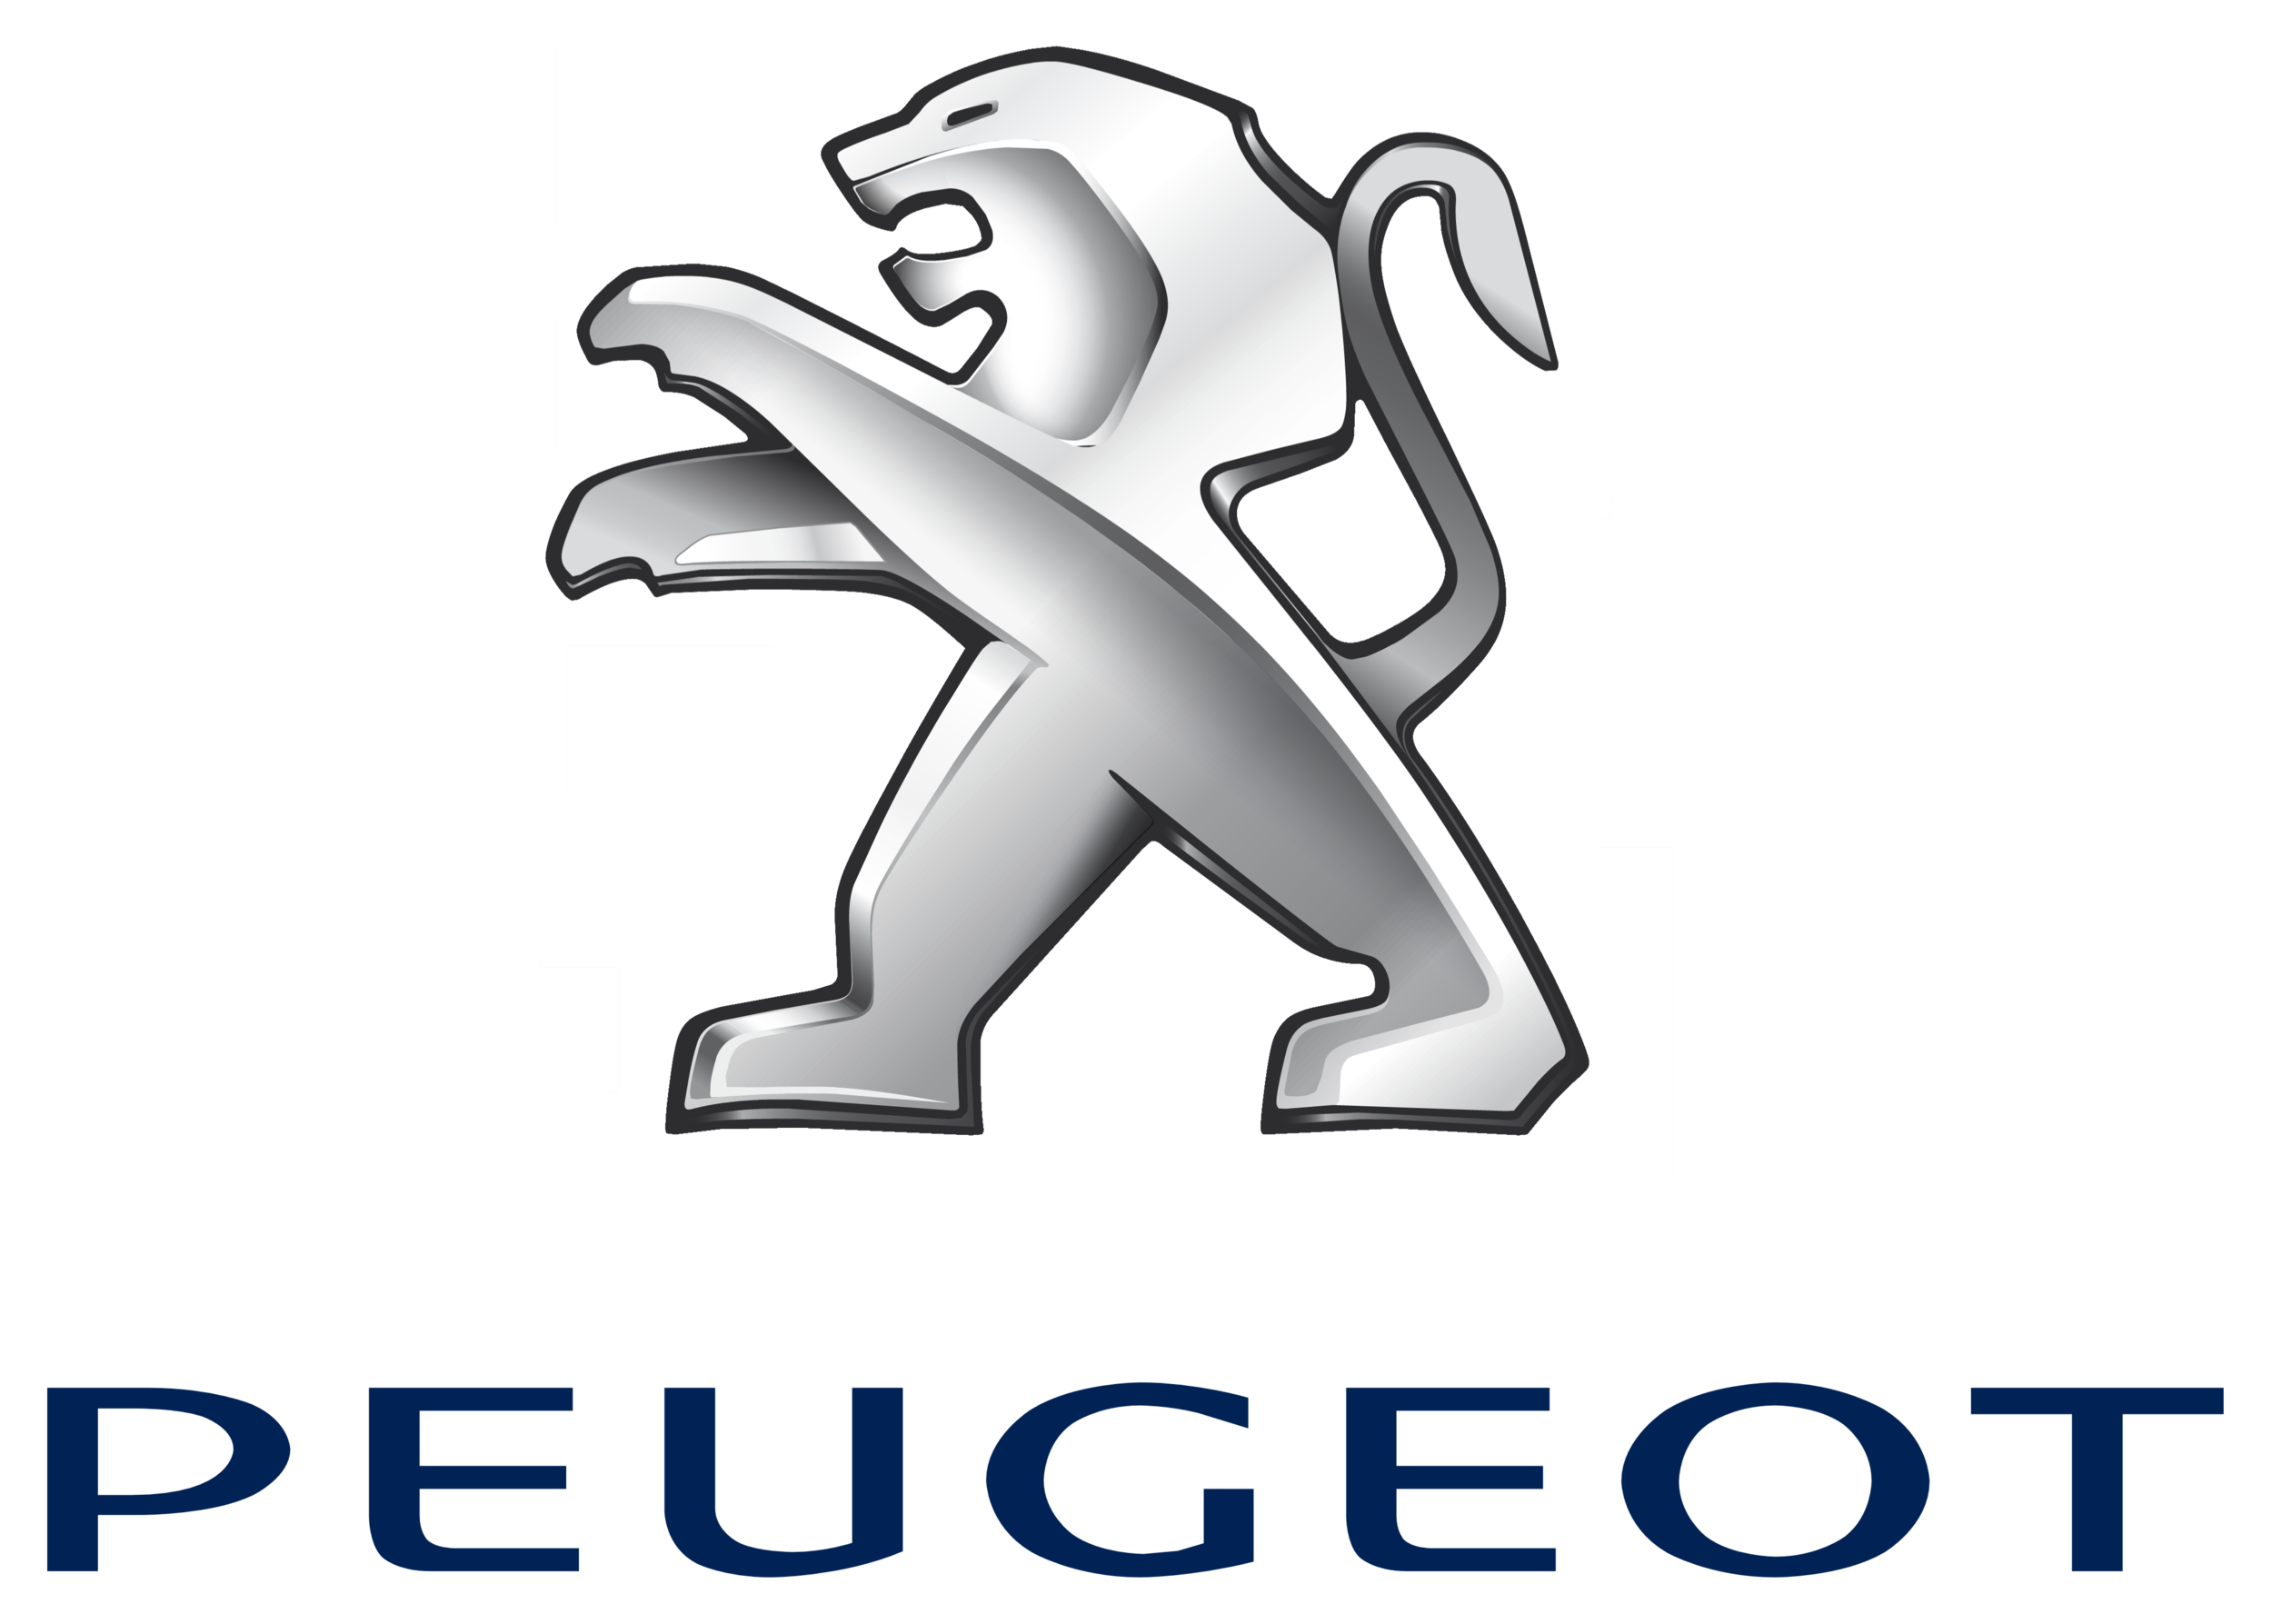 Peugeot_logo-Marshall-Electric.png